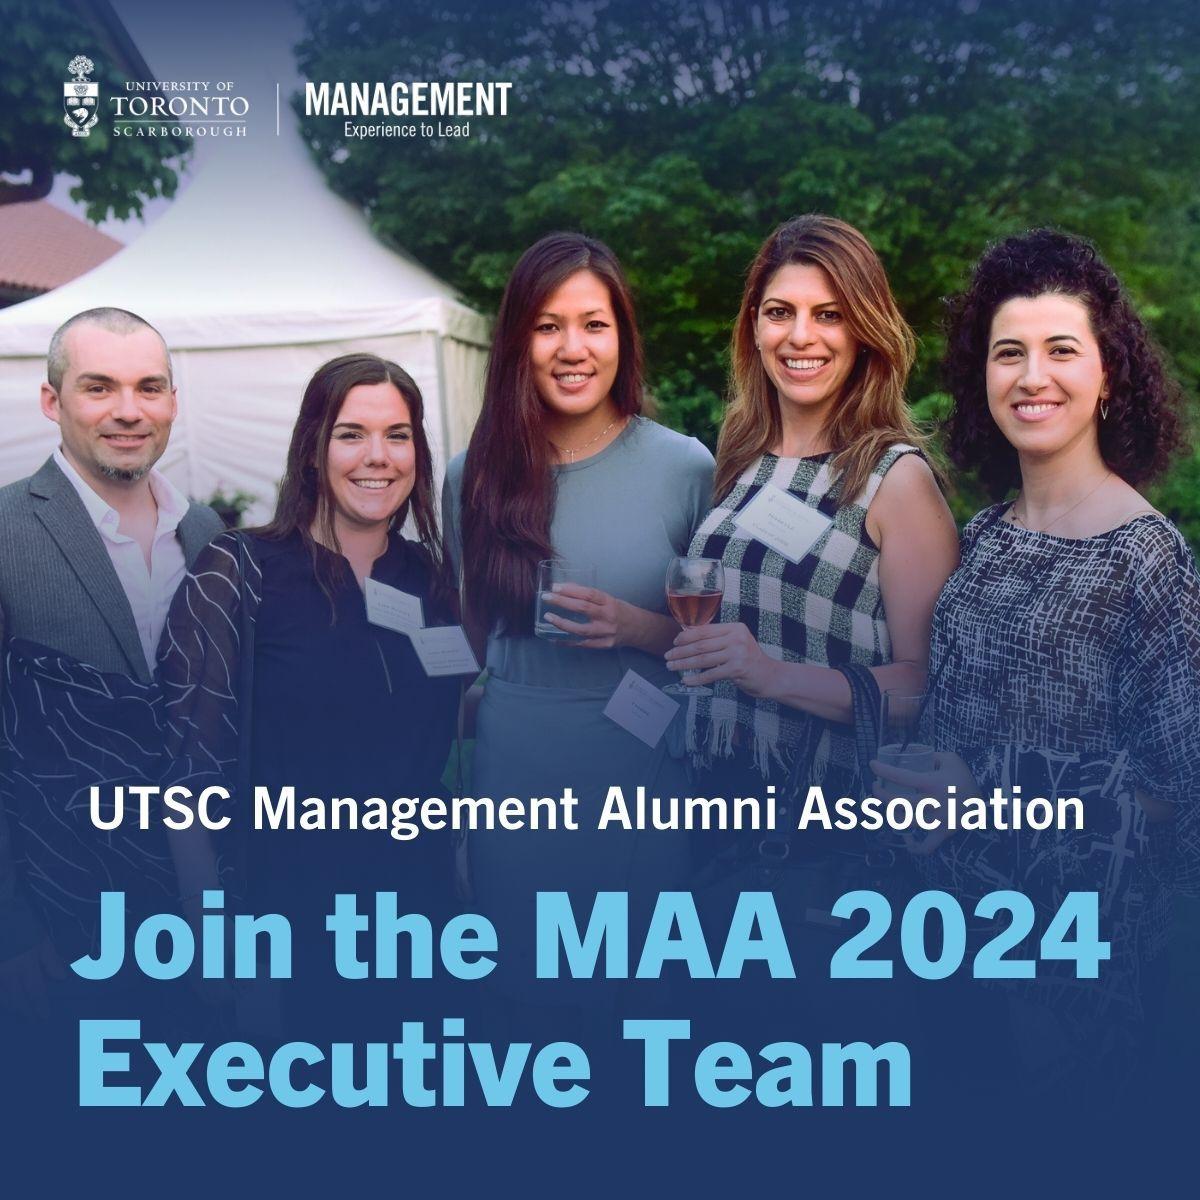 MAA executive recruitment poster featuring a group of smiling U of T Scarborough Management graduates and faculty formally attired at a summer outdoor function and smiling widely with a stately home visible in the background.